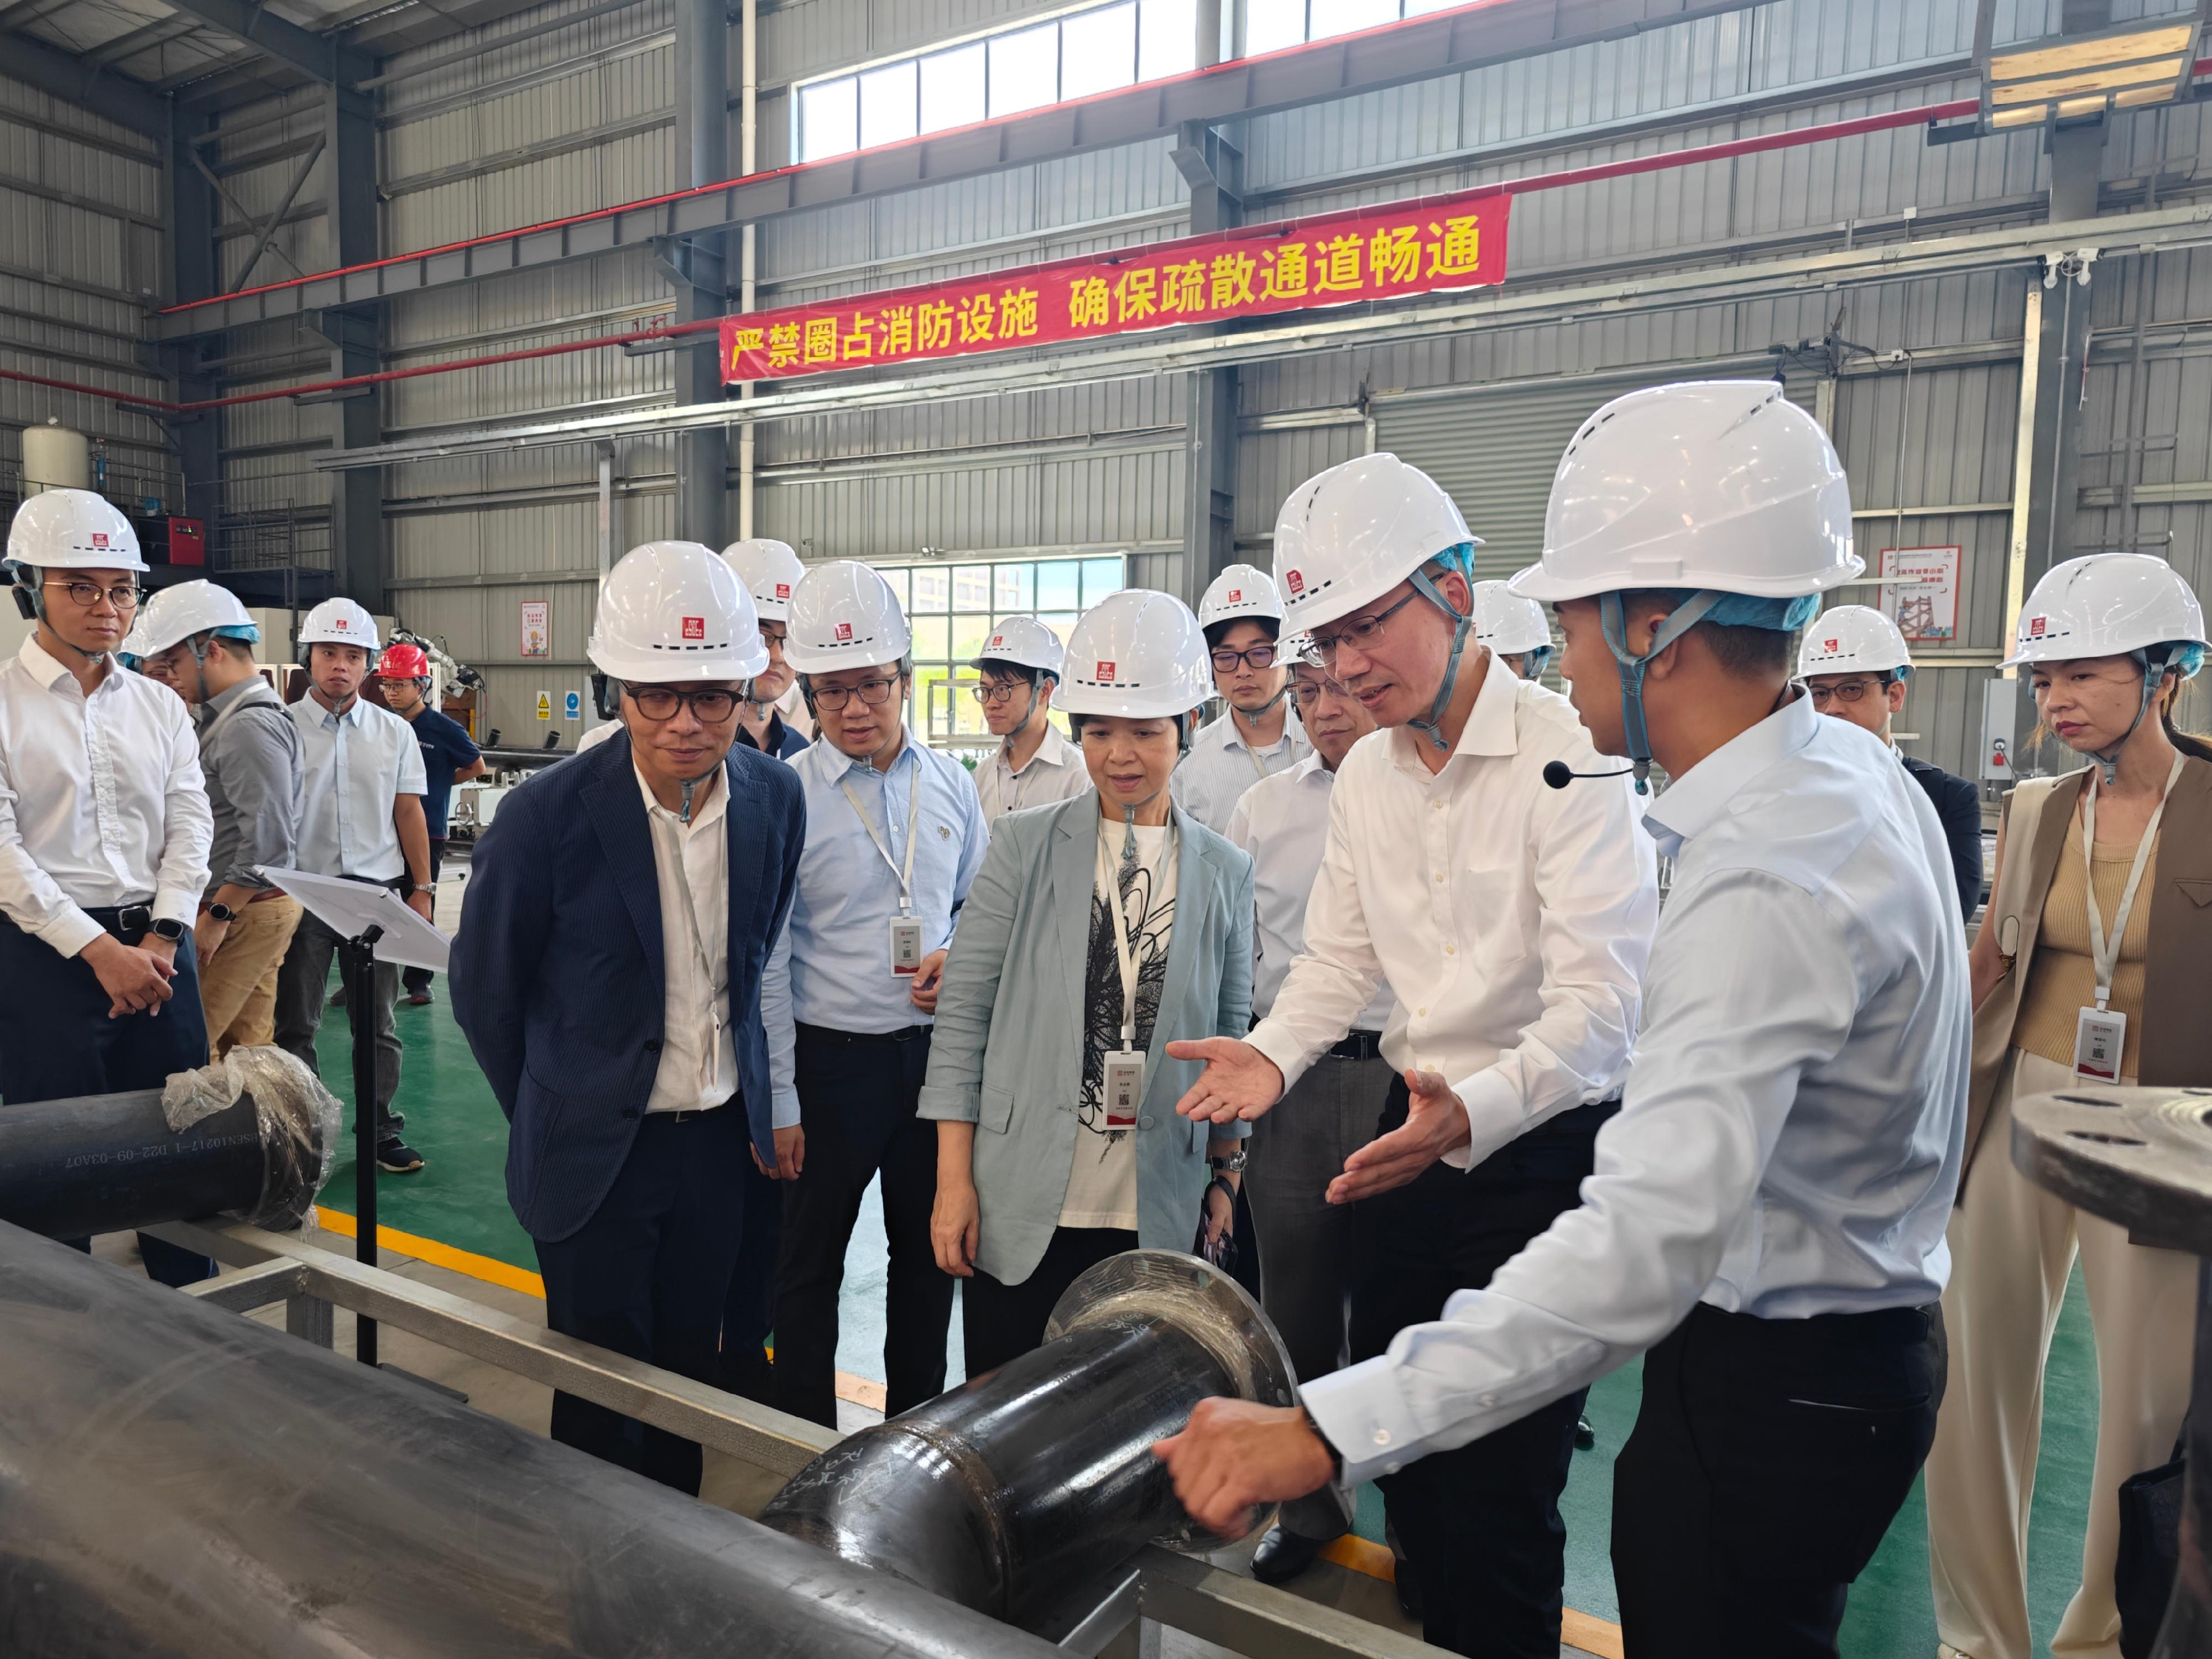 The Secretary for Housing, Ms Winnie Ho, and representatives of the Housing Department visited Zhuhai today (September 19) to get an understanding of the latest development of Multi-trade Integrated Mechanical, Electrical and Plumbing (MiMEP) in the Guangdong-Hong Kong-Macao Greater Bay Area, as well as the application of this innovative and efficient construction technology in Hong Kong's public housing projects. Photo shows Ms Ho (front row, third right) visiting the digital pavilion and production lines of the China Overseas Innovation & Technology (Zhuhai) Company Limited.